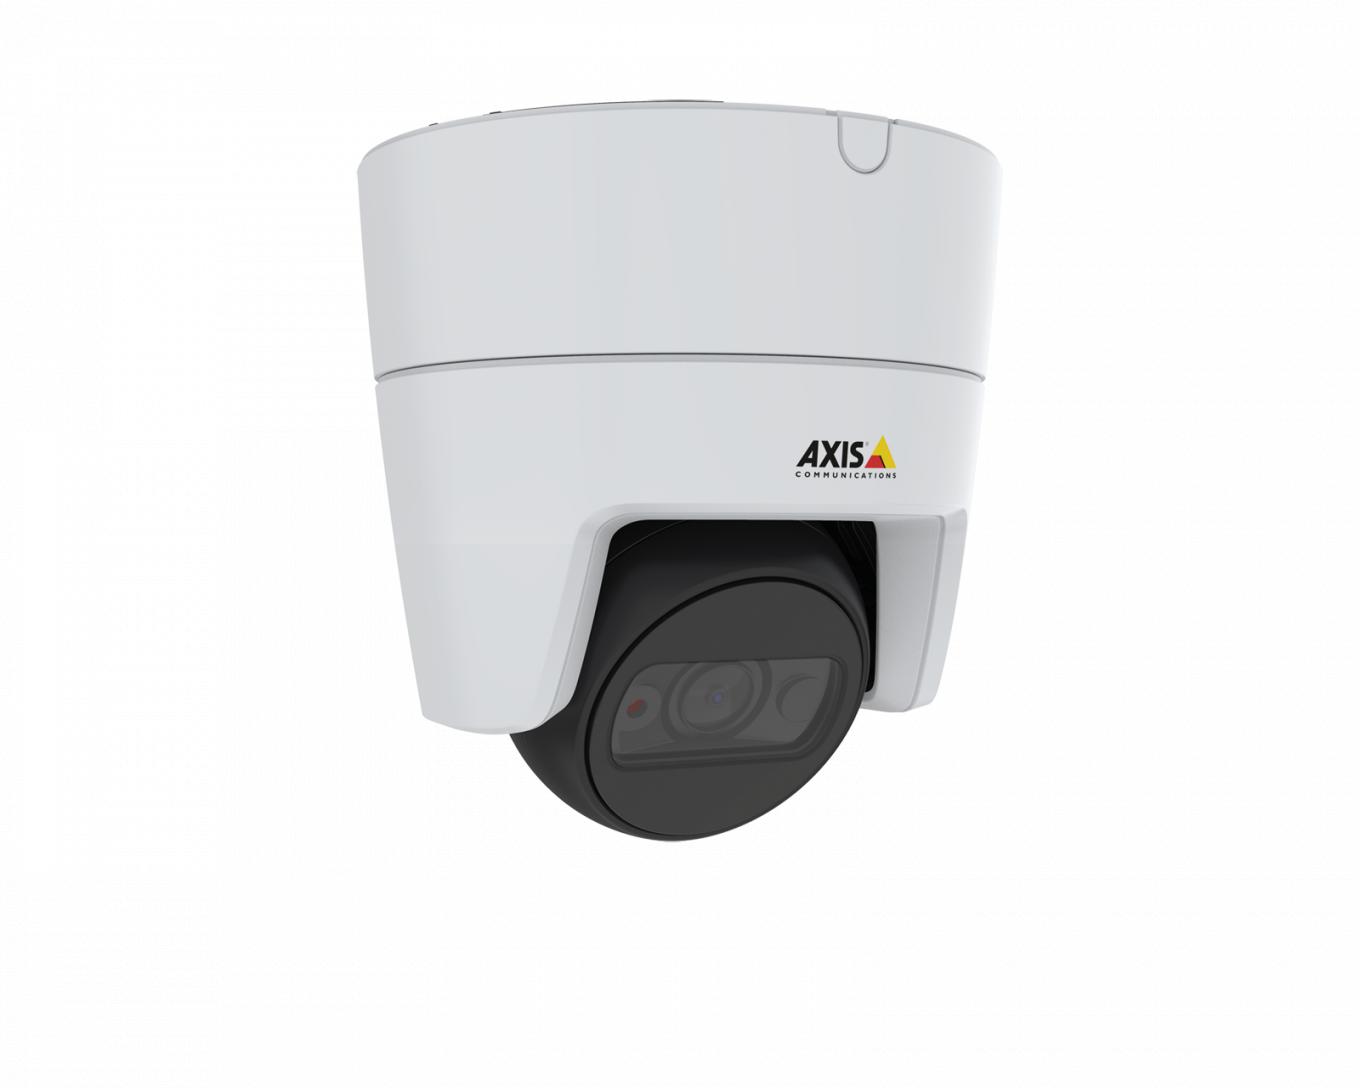 AXIS M3115-LVE IP Camera mounted in ceiling from right angle 